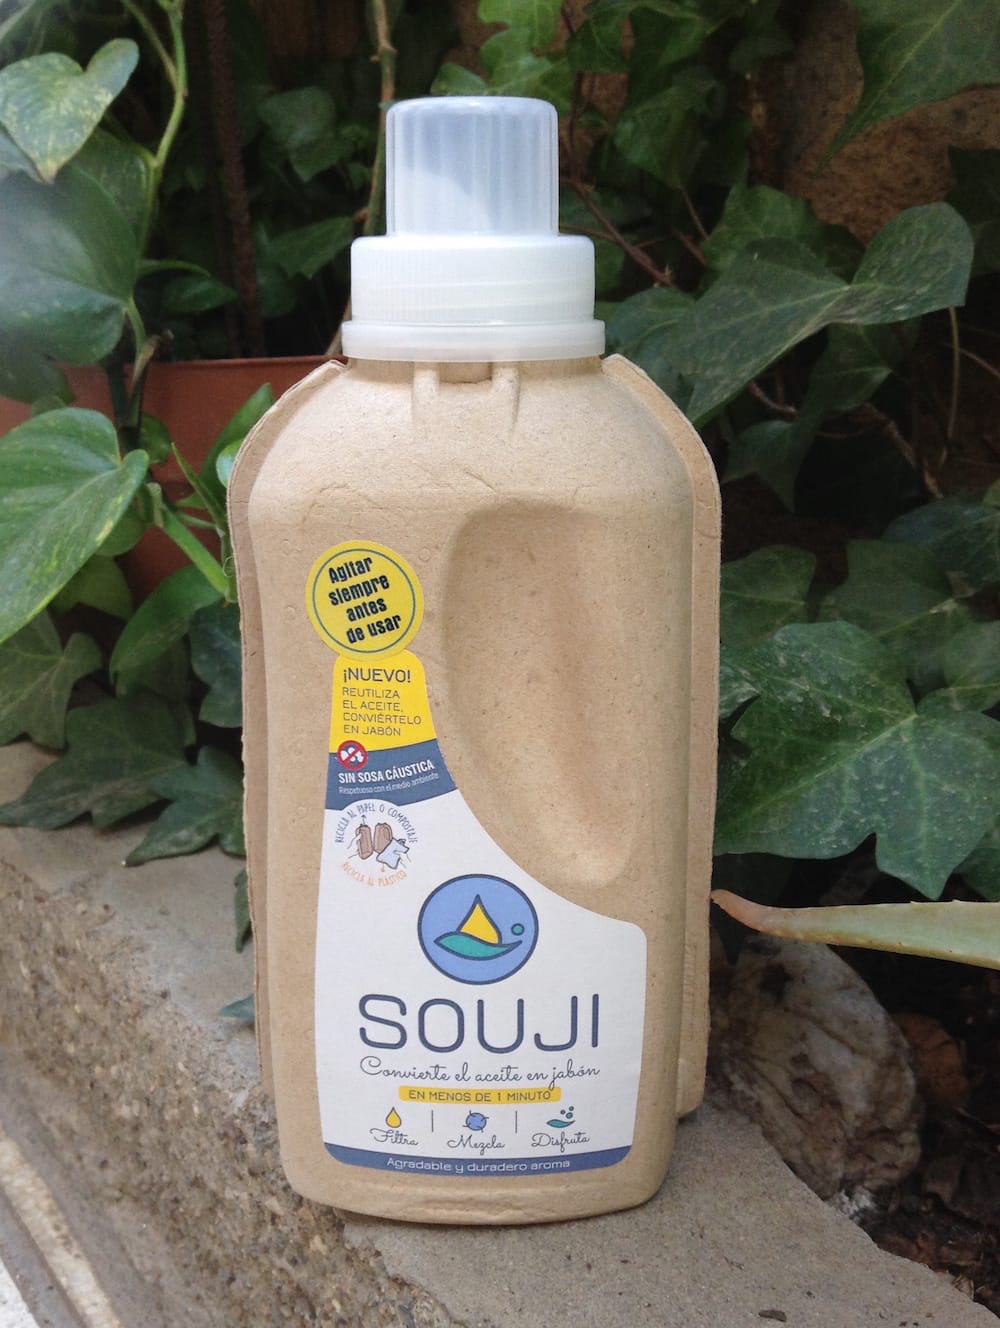 SOUJI, turning cooking oil into detergent